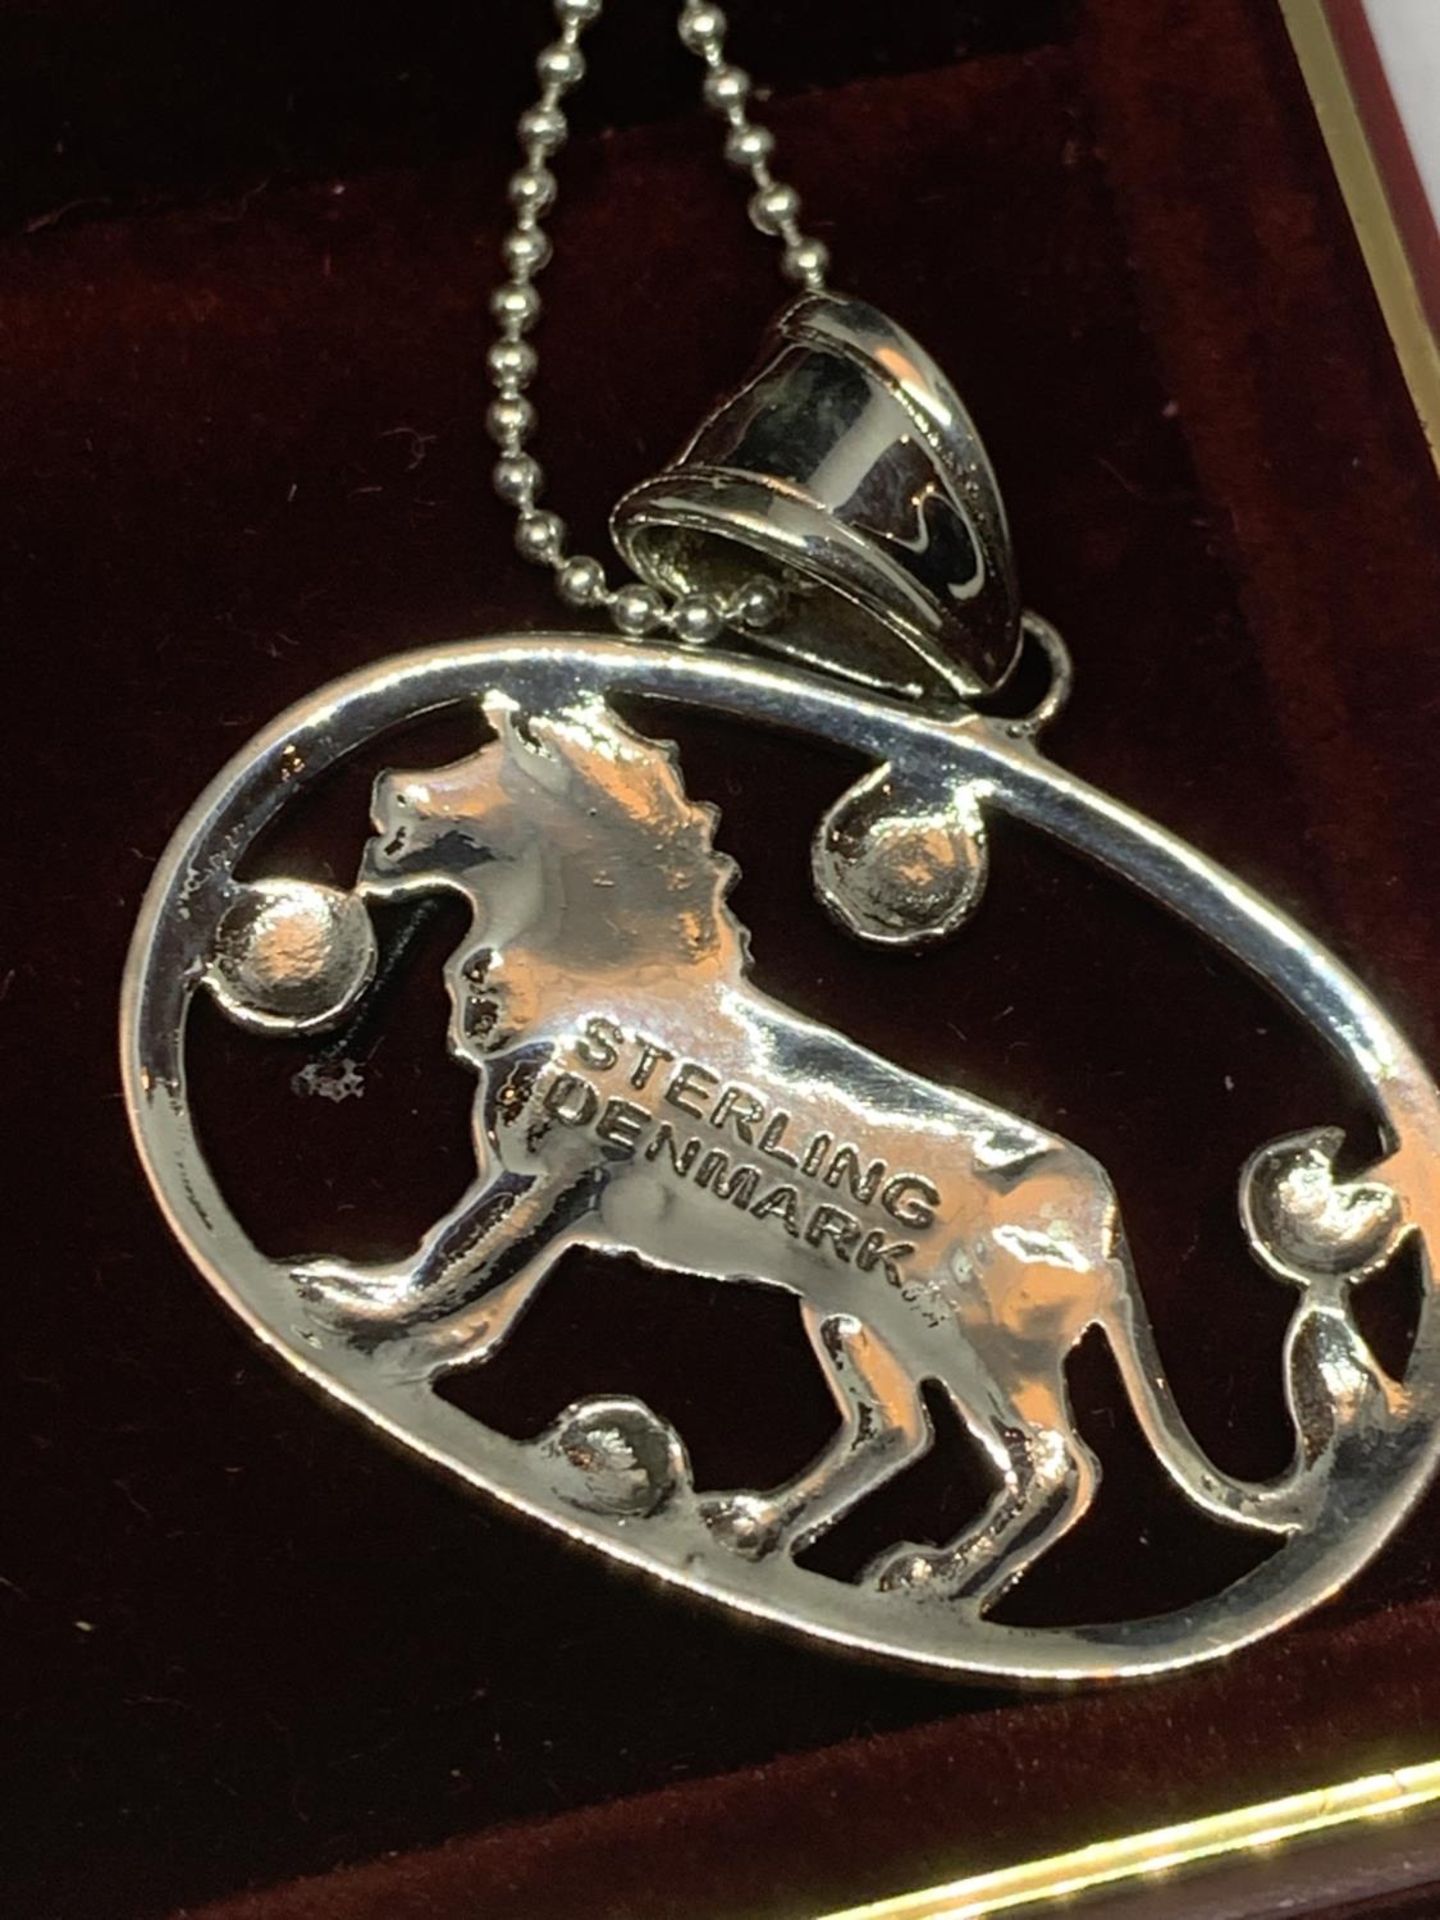 A SILVER NECKLACE WITH A LION PENDANT IN A PRESENTATION BOX - Image 3 of 3